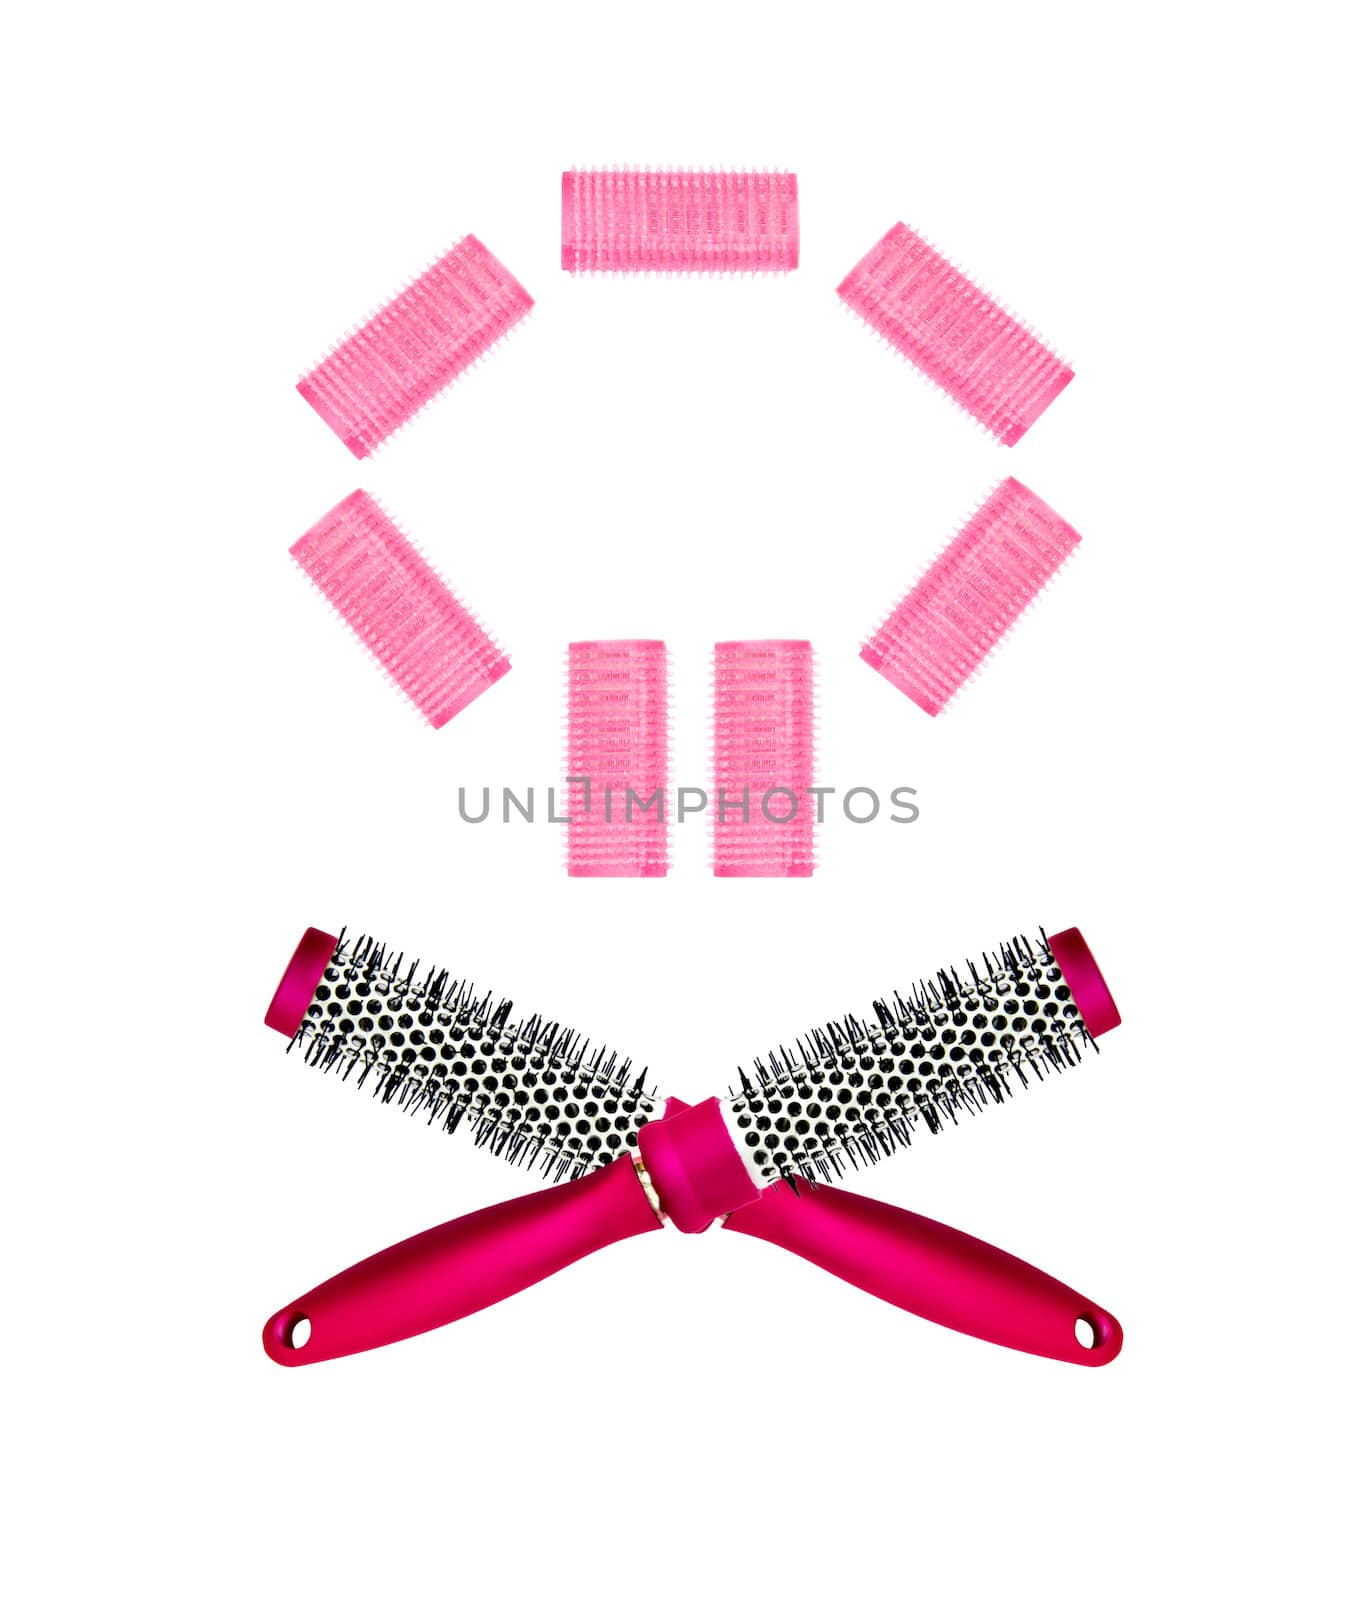 hairbrush and curlers by marco_govel